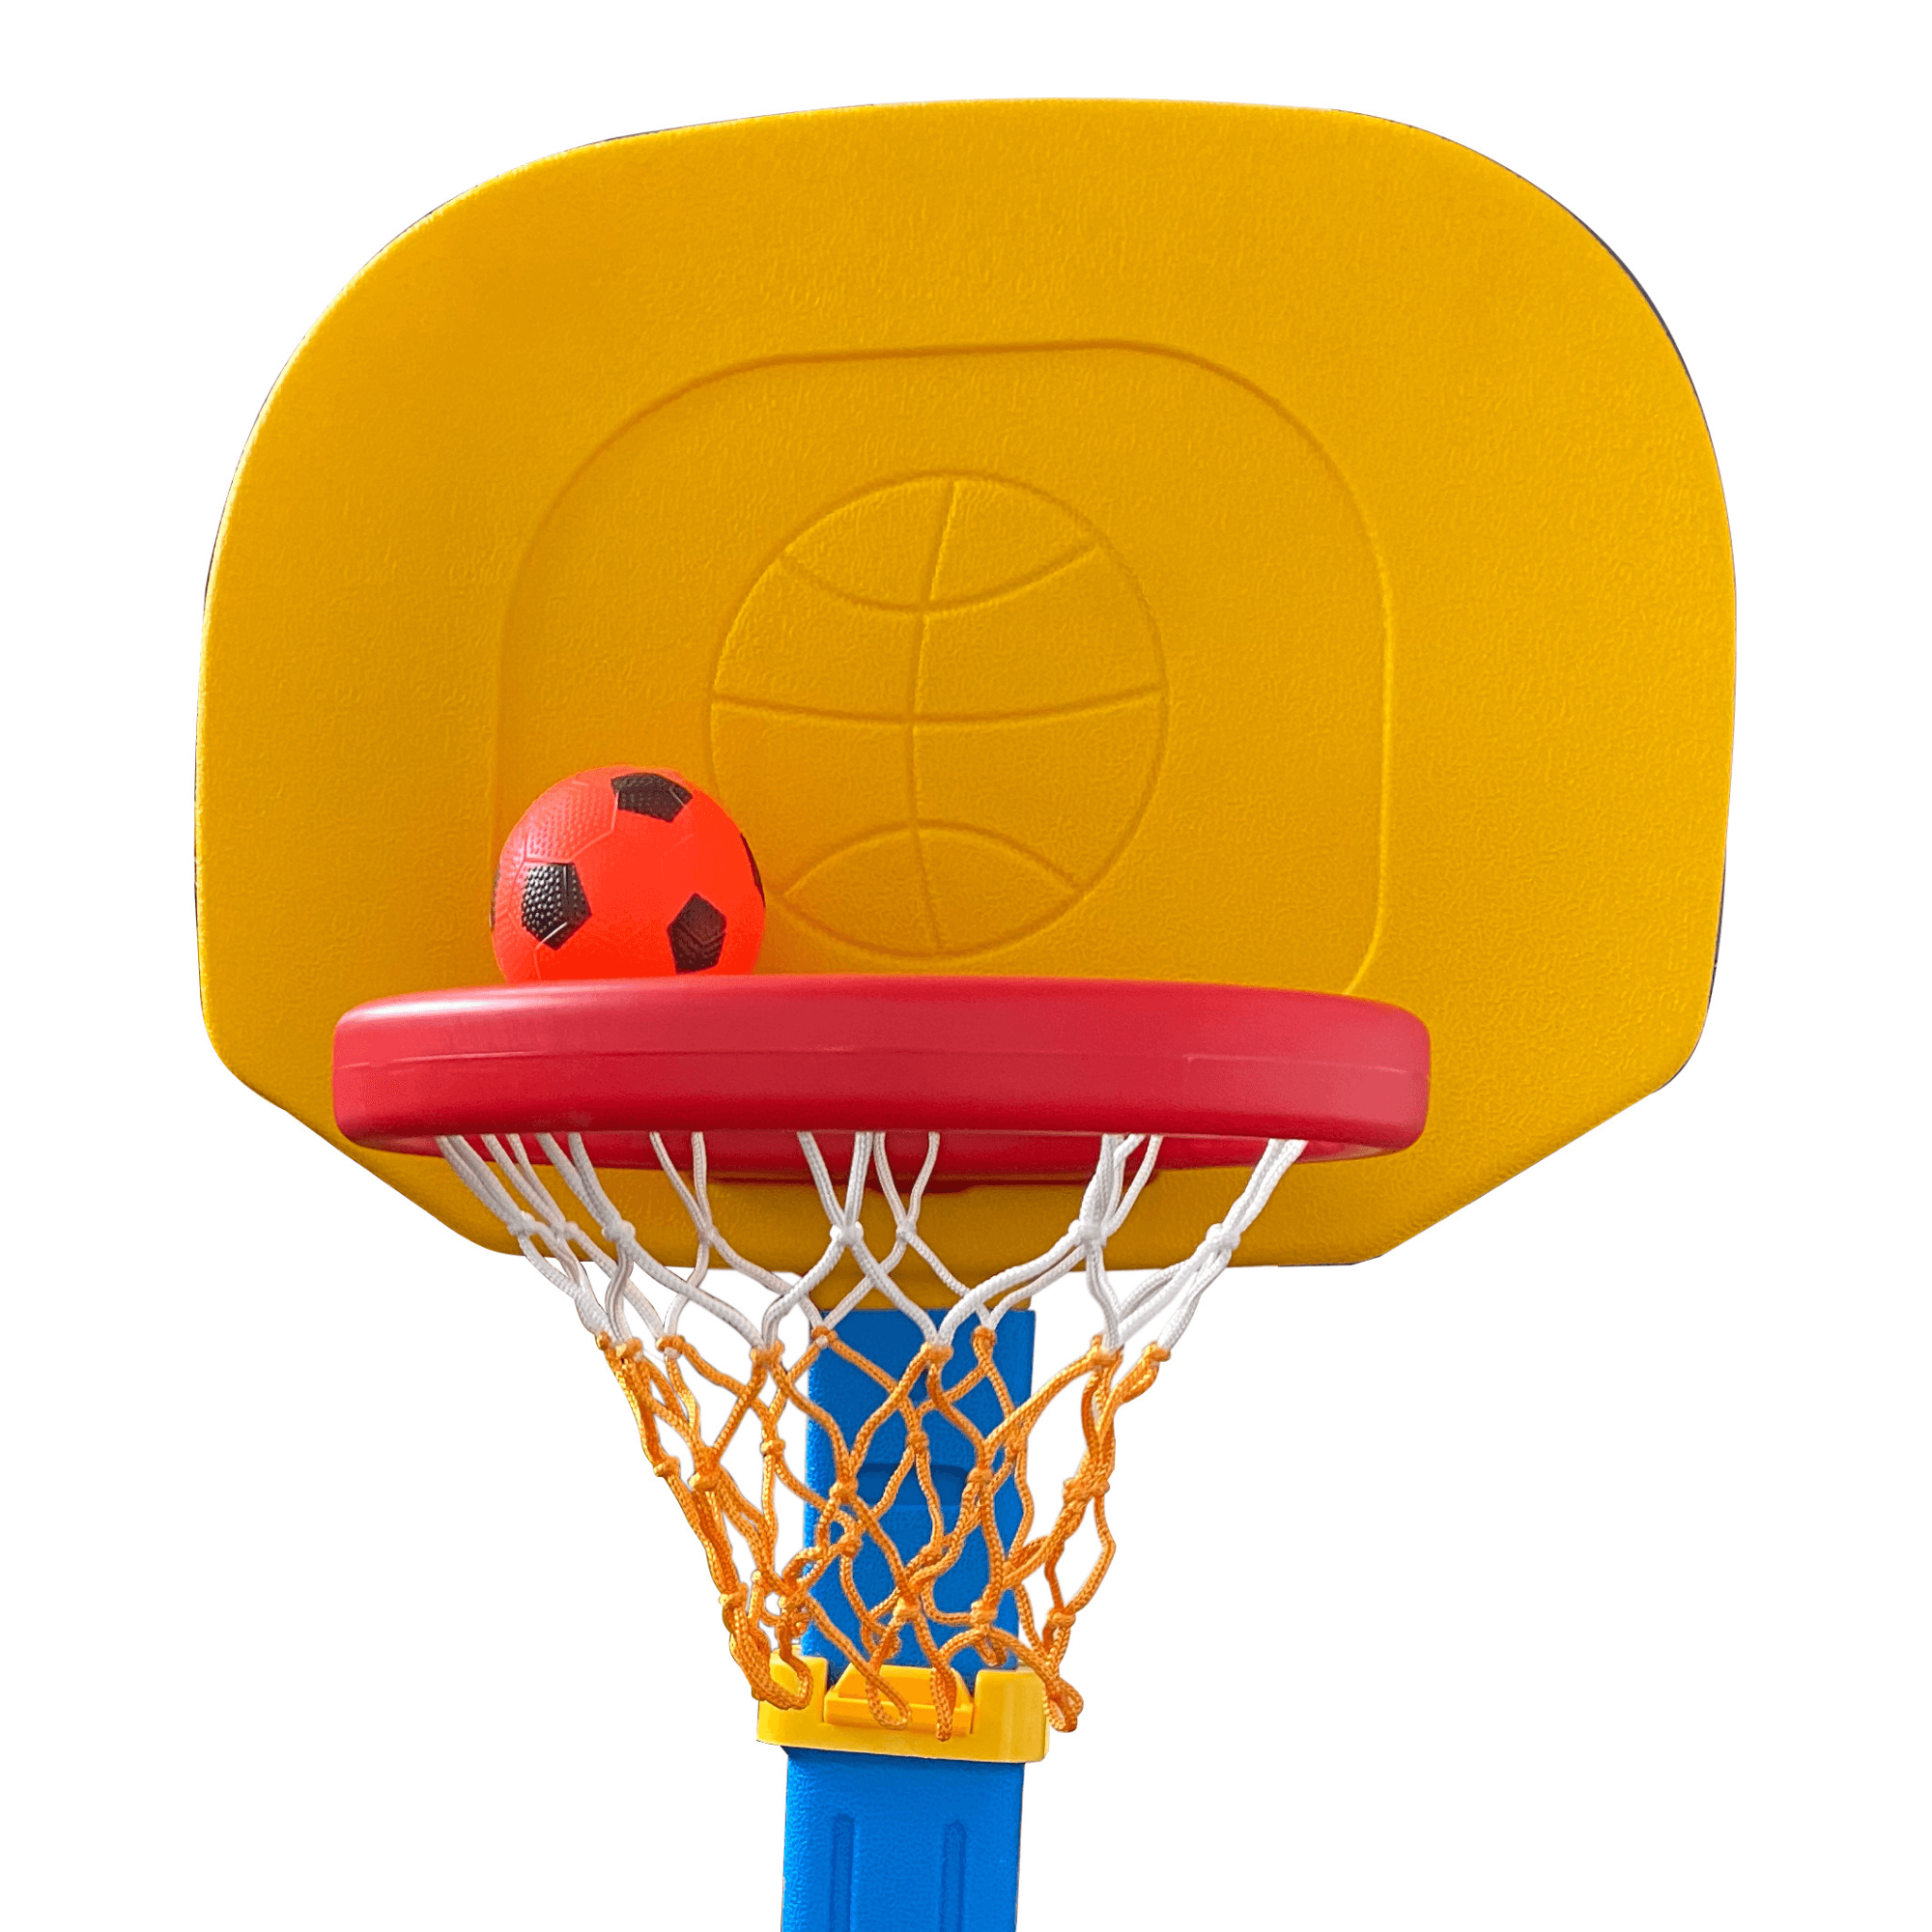 Children'S Outdoor Indoor Basketball Frame Toy Sports Red Yellow And Blue Adjustable Height LamCham